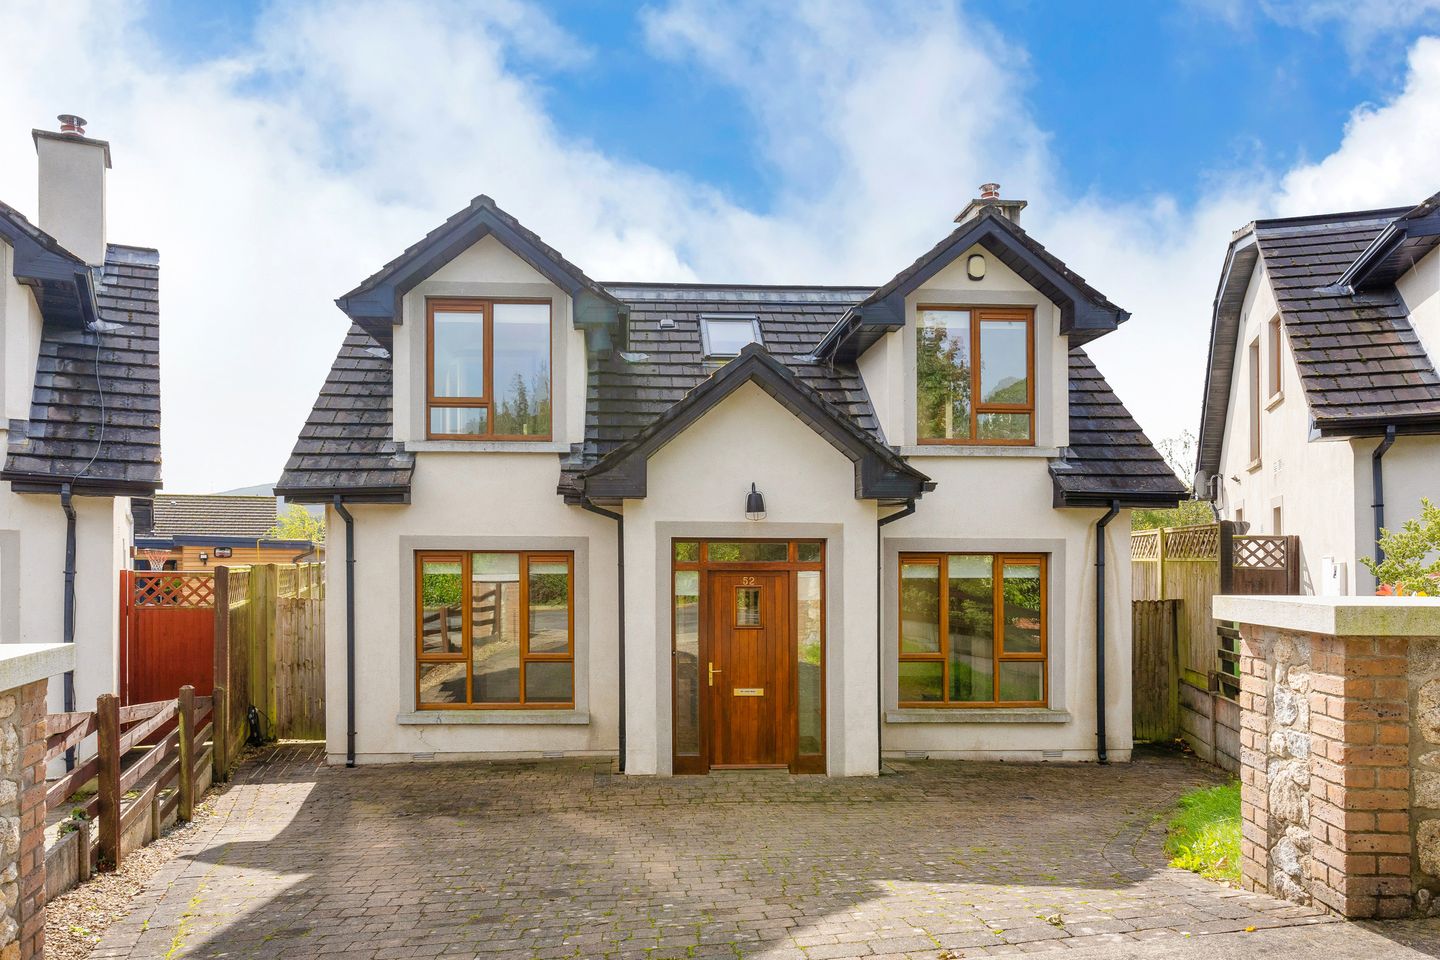 52 Aughrim Hall, Aughrim, Co. Wicklow, Y14WA09